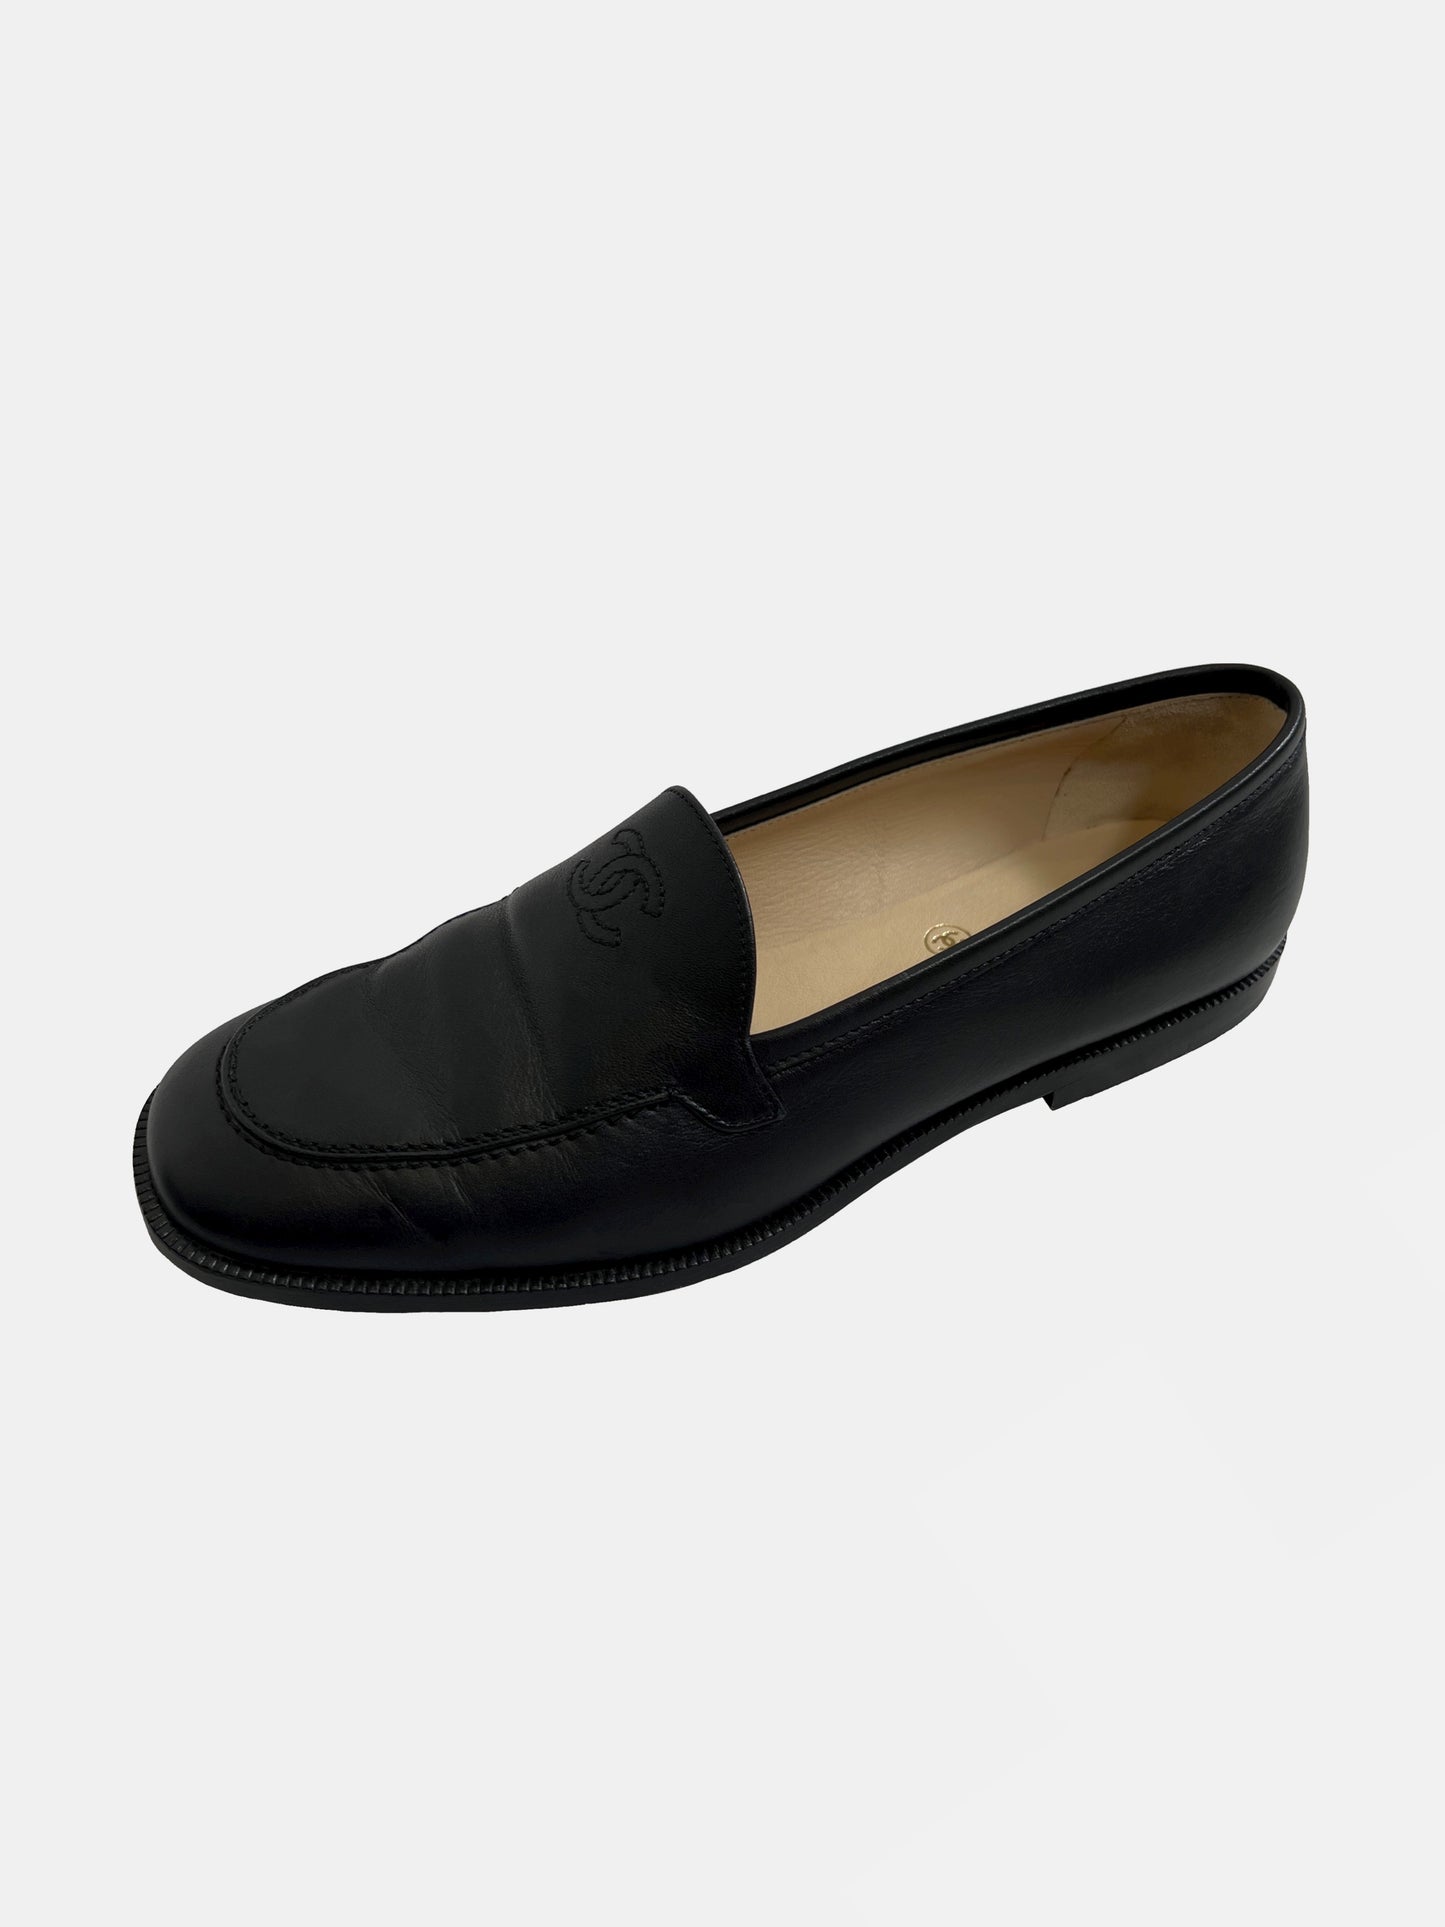 Chanel Loafers, IT 36.5